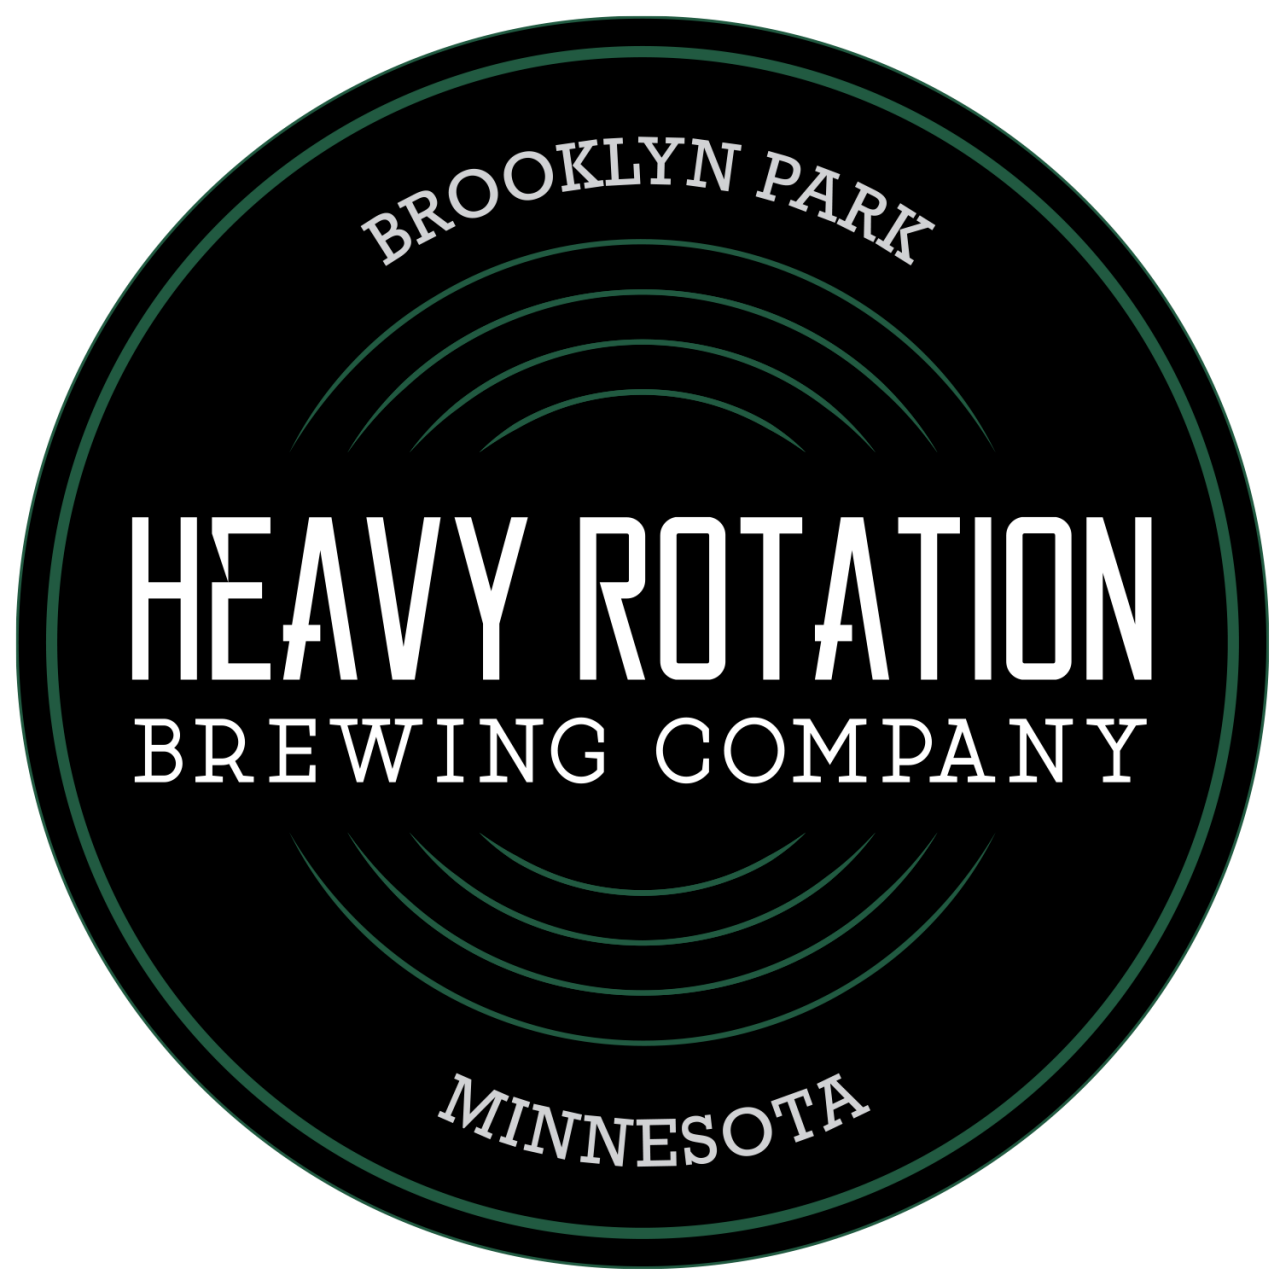 https://www.mncraftbrew.org/wp-content/uploads/2022/02/HeavyRotation-1280x1280.png